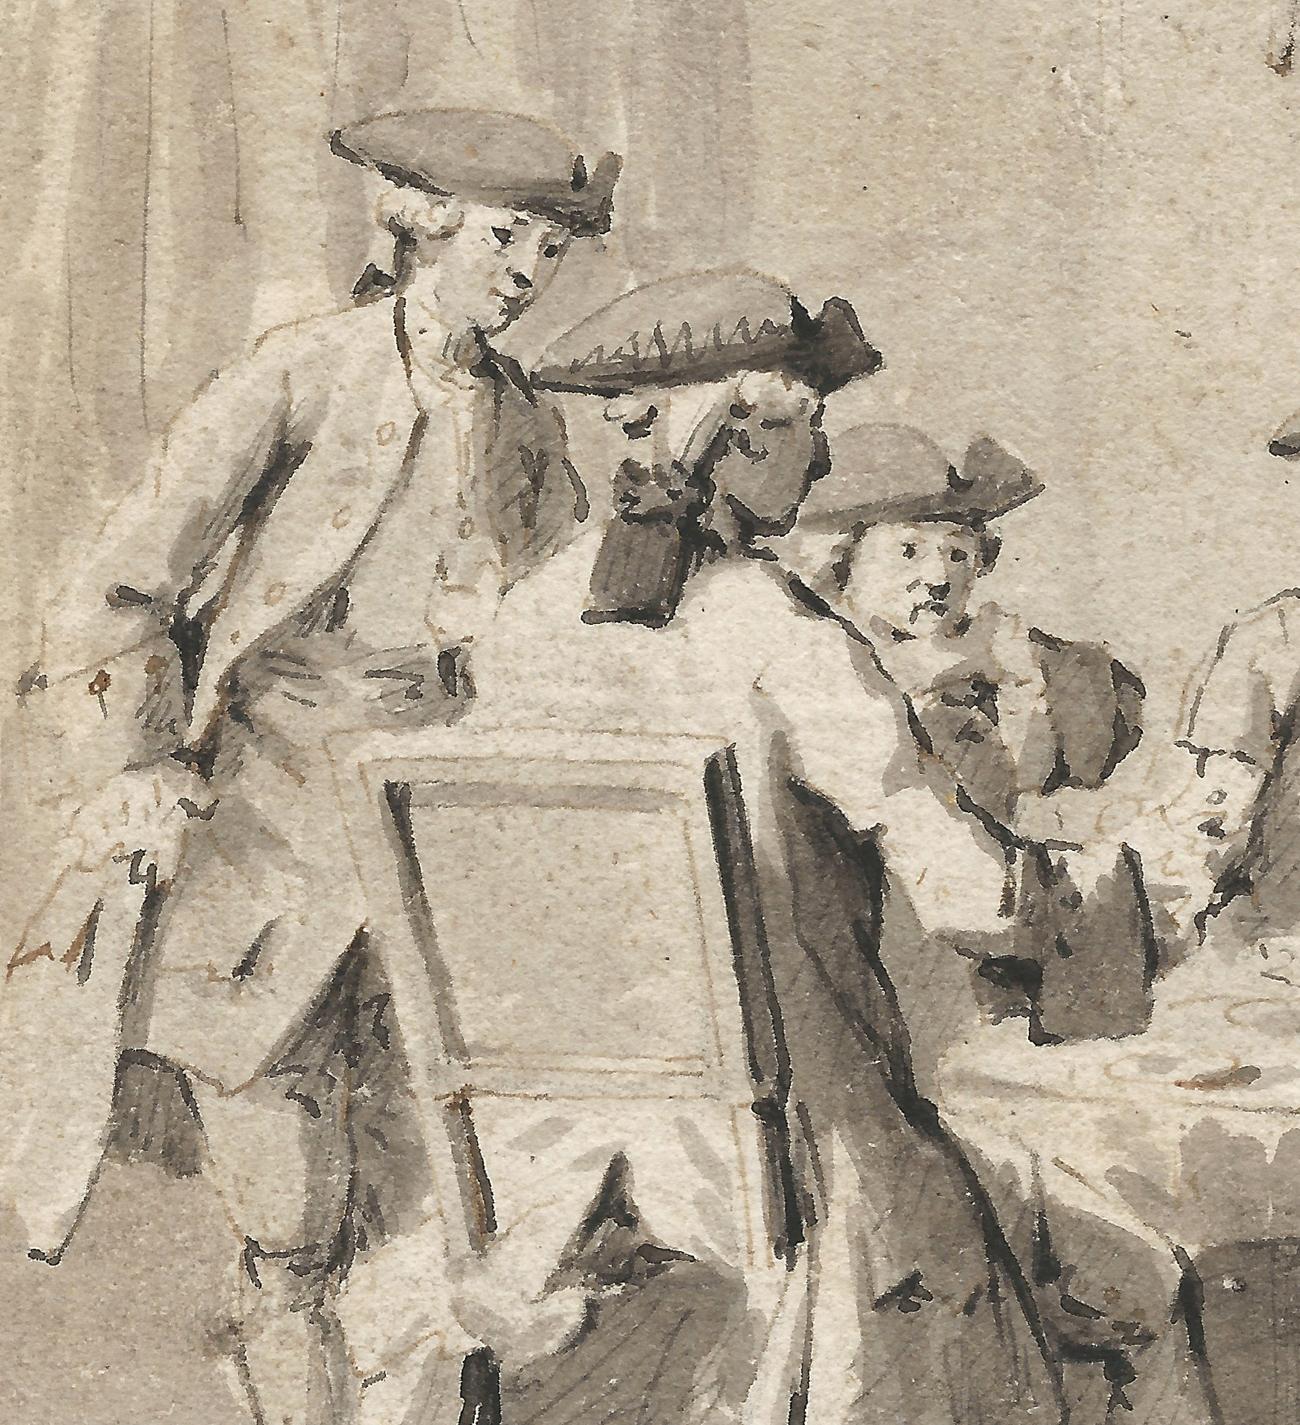 Reinier Vinkeles (Amsterdam 1741 – 1816 Amsterdam)

Gentlemen Playing Cards

Pen and brown and grey ink, grey wash, 154 x 149 mm (6.1 x 5.9 inch)

Provenance
Private collection, Germany, until 2018

~

Reinier Vinkeles was first taught by the